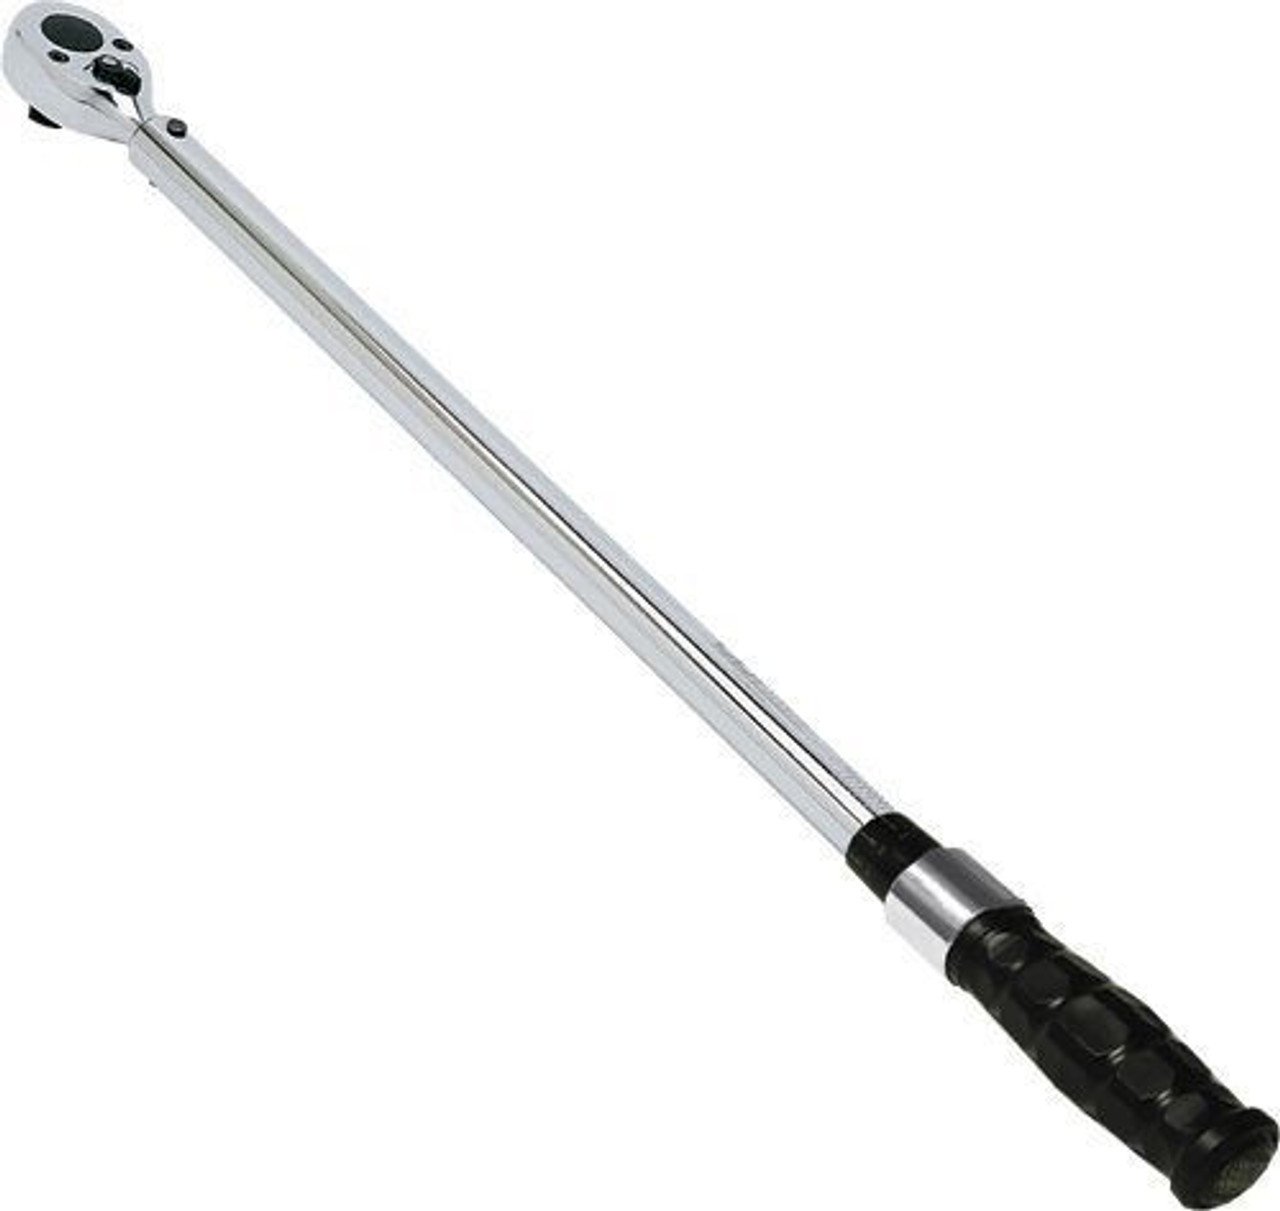 1/2" Dr 30-250 Ft Lbs / 47-332 Nm Williams Comfort Grip Adj Torque Wrench - 2503MFRPHW